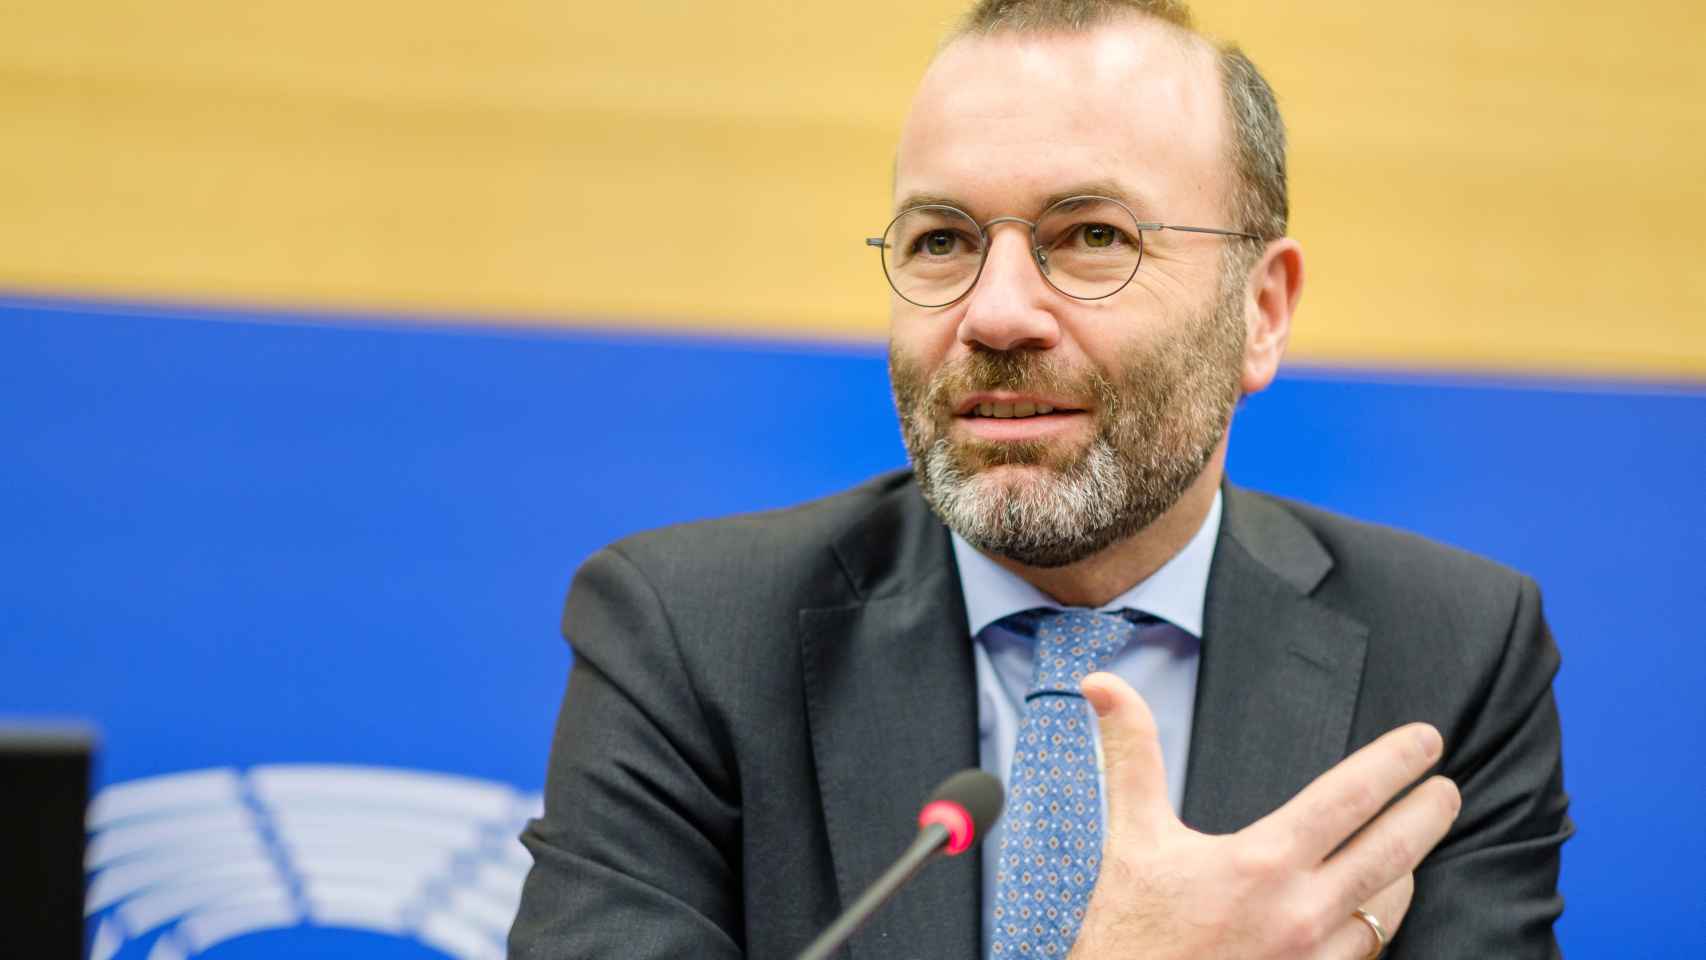 Manfred Weber, president of the EPP, in the European Parliament.